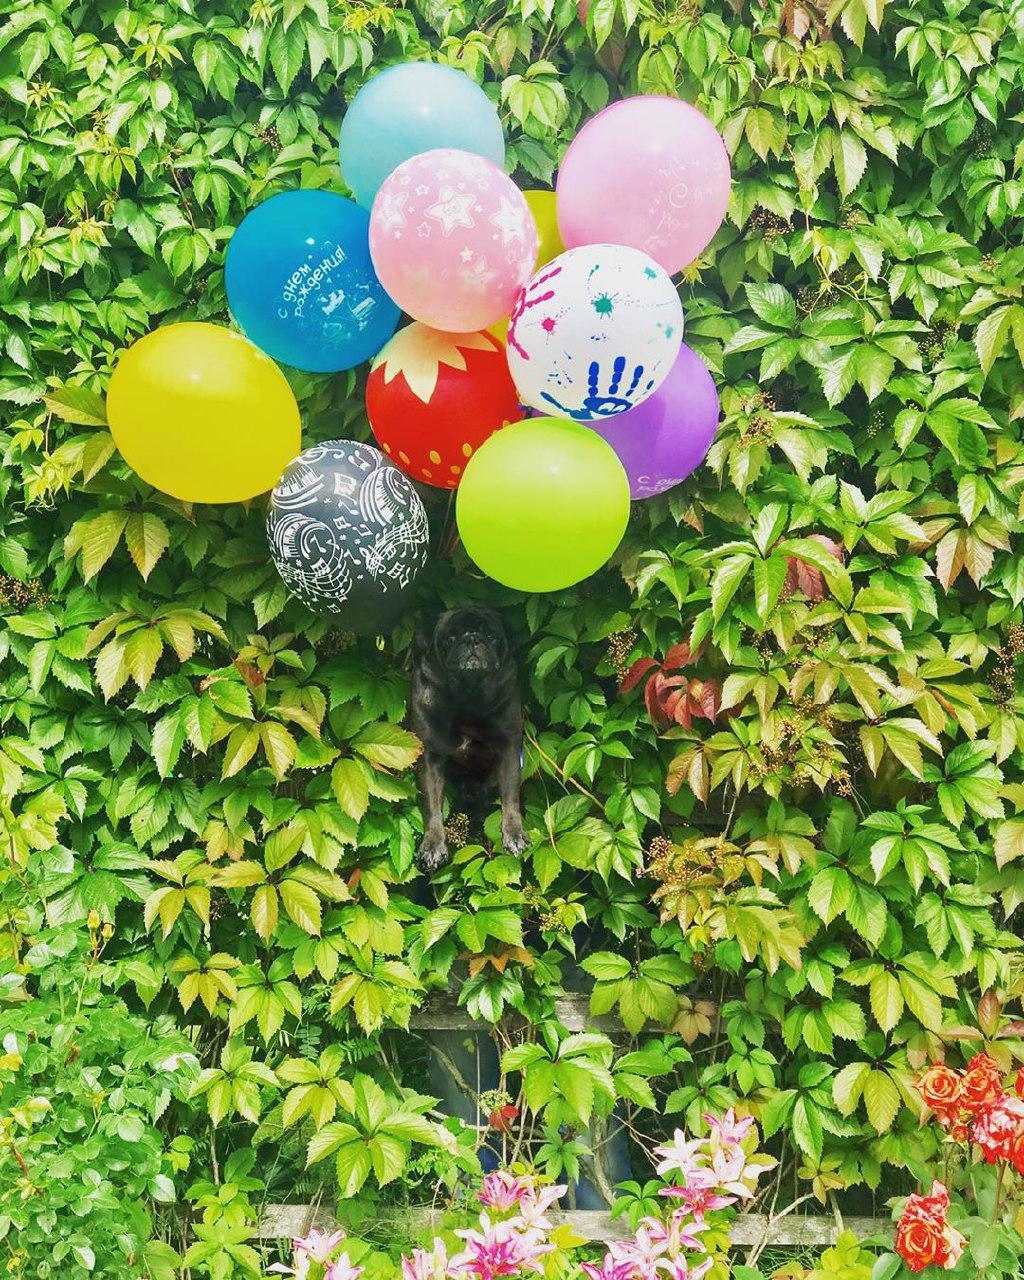 black Pug floating in balloons while stuck in a wall made of leaves in the garden